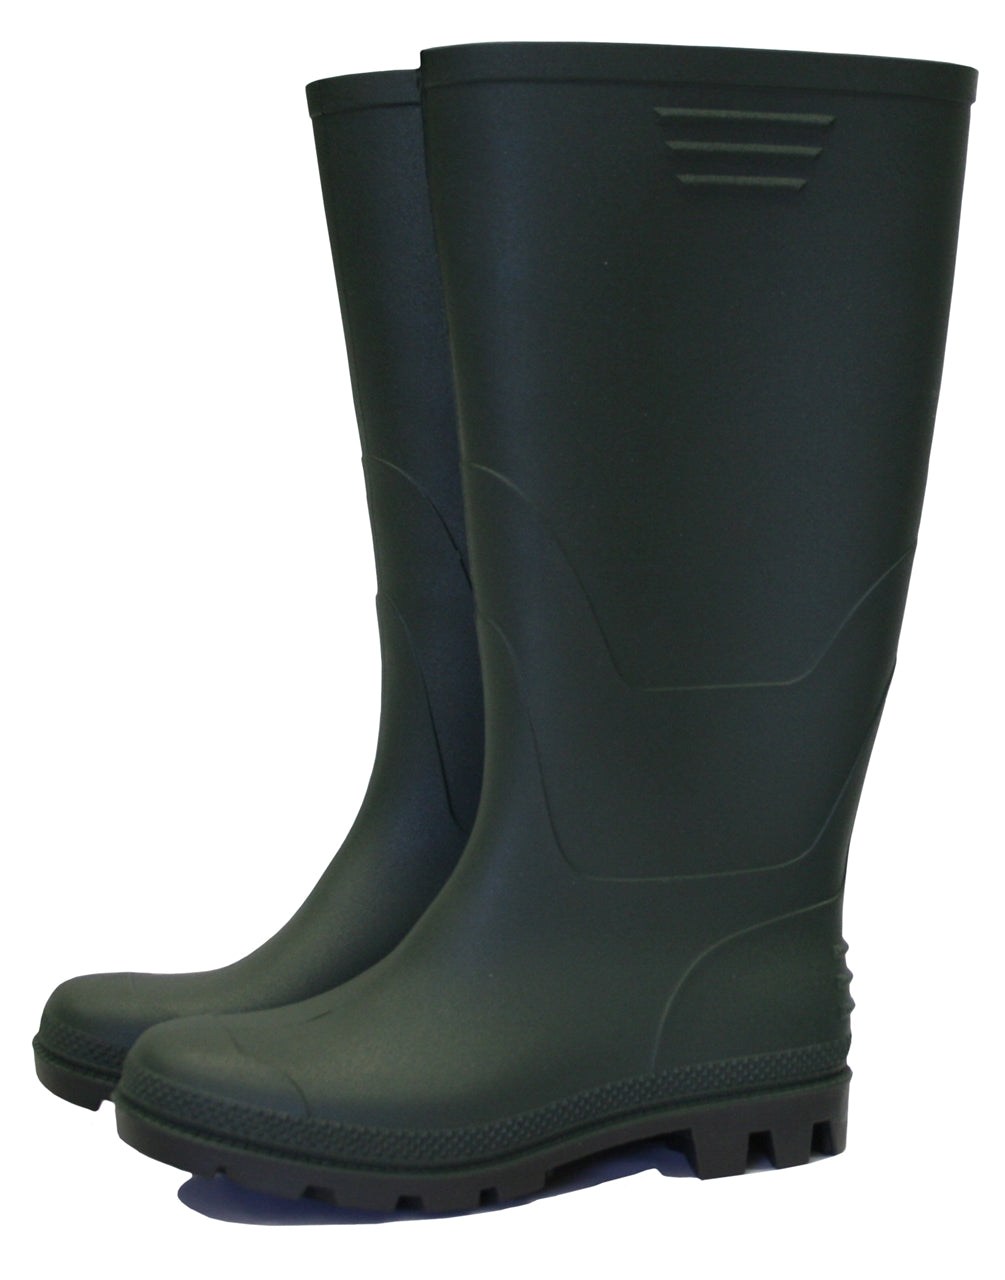 Town & Country Original Full Length Wellington Boots